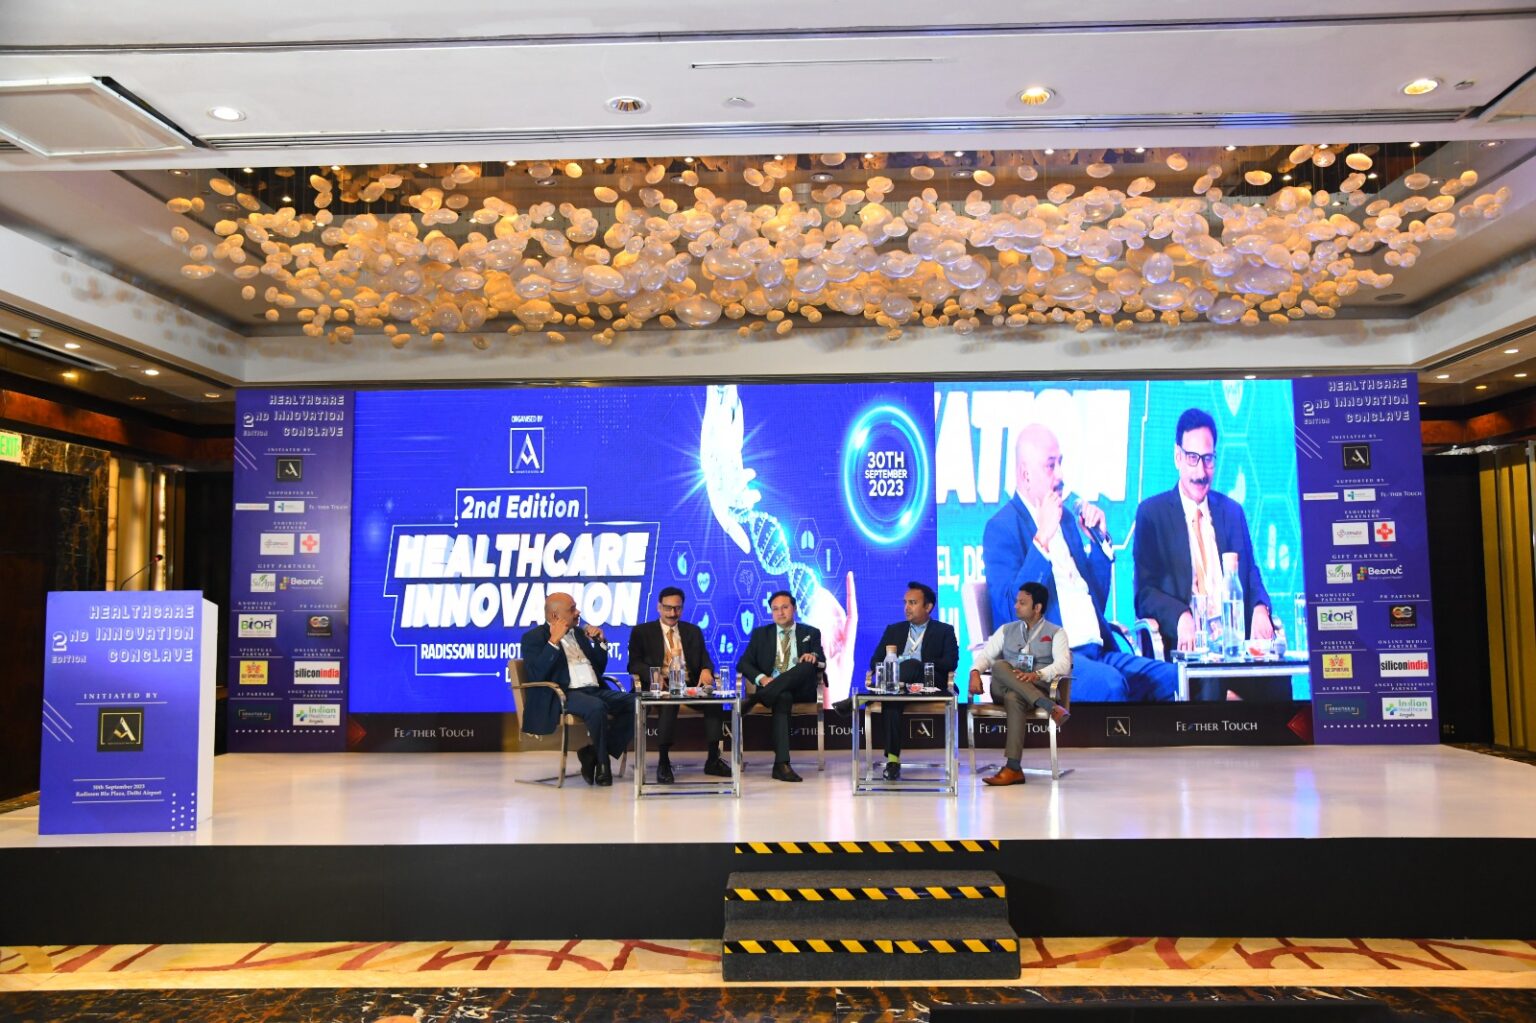 Aristocrat Media Successfully Hosts the 2nd Edition of Healthcare Innovation Conclave & Awards in New Delhi, Supported by Approach Entertainment as PR Partner and Go Spiritual India as Spiritual Partner